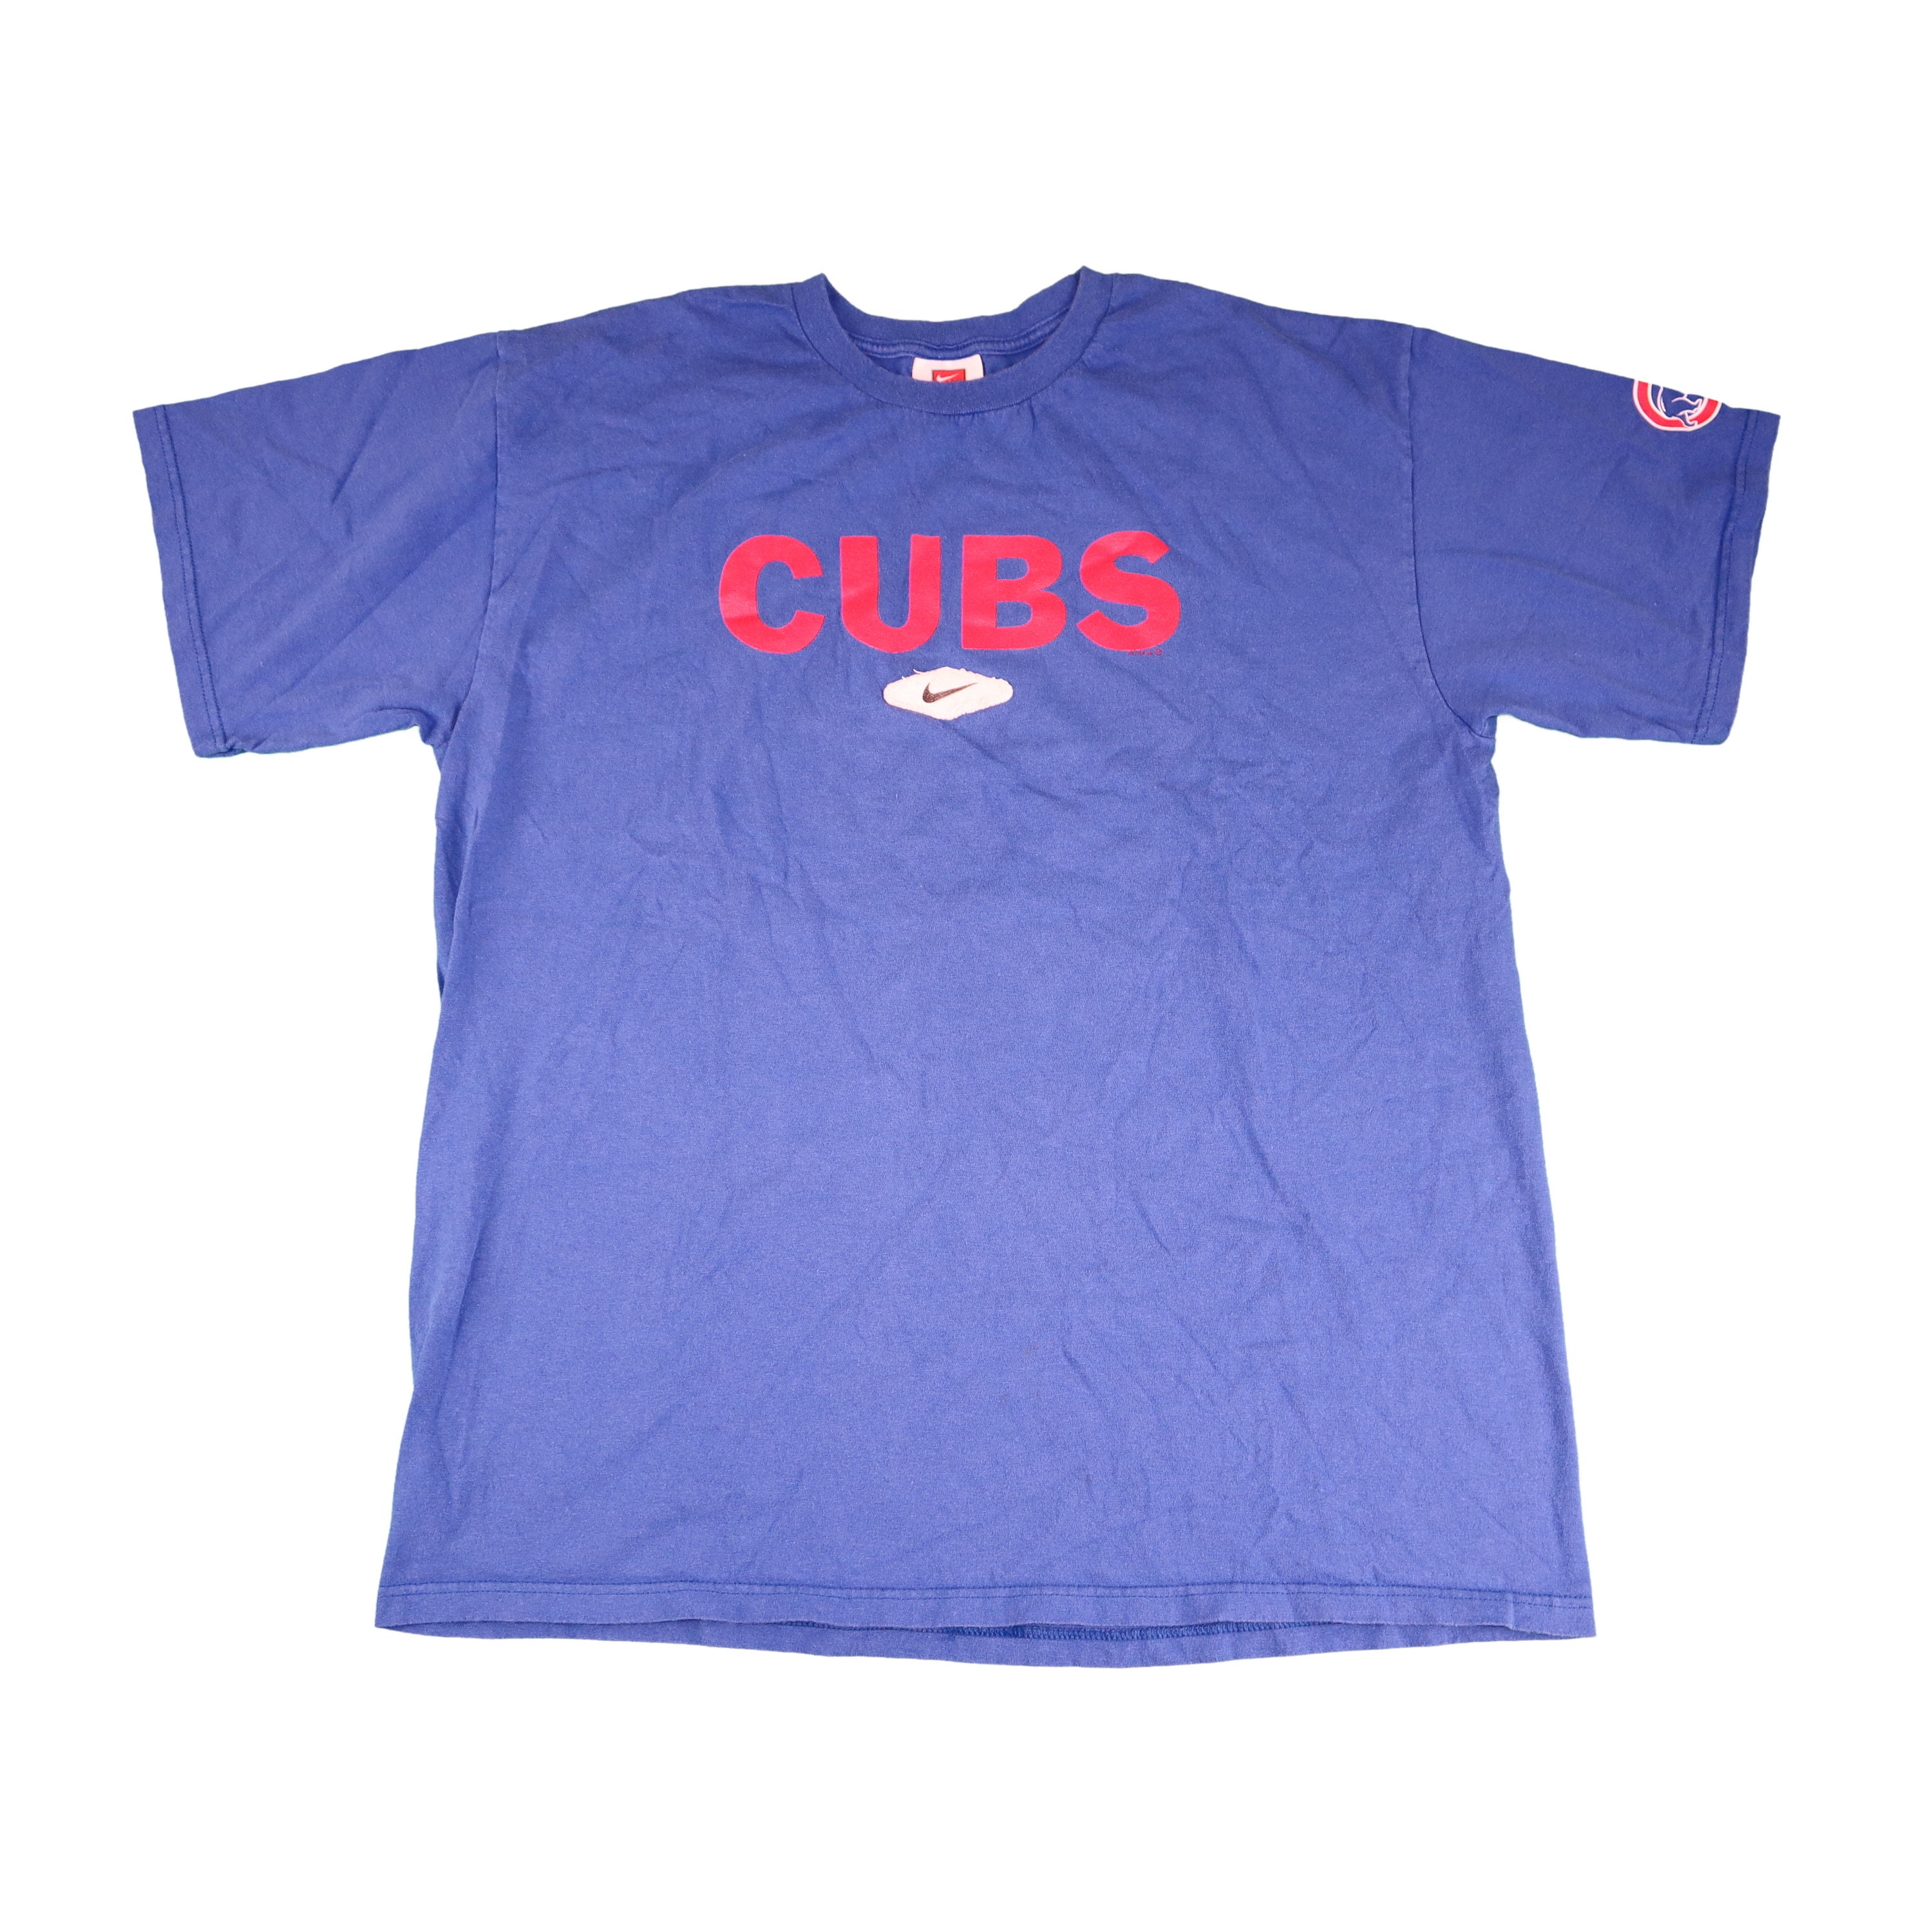 Harry Caray Chicago Cubs T-Shirt, Vintage Cubs Tee, MLB Retro, Throwback, Screen Printing, Online Stores